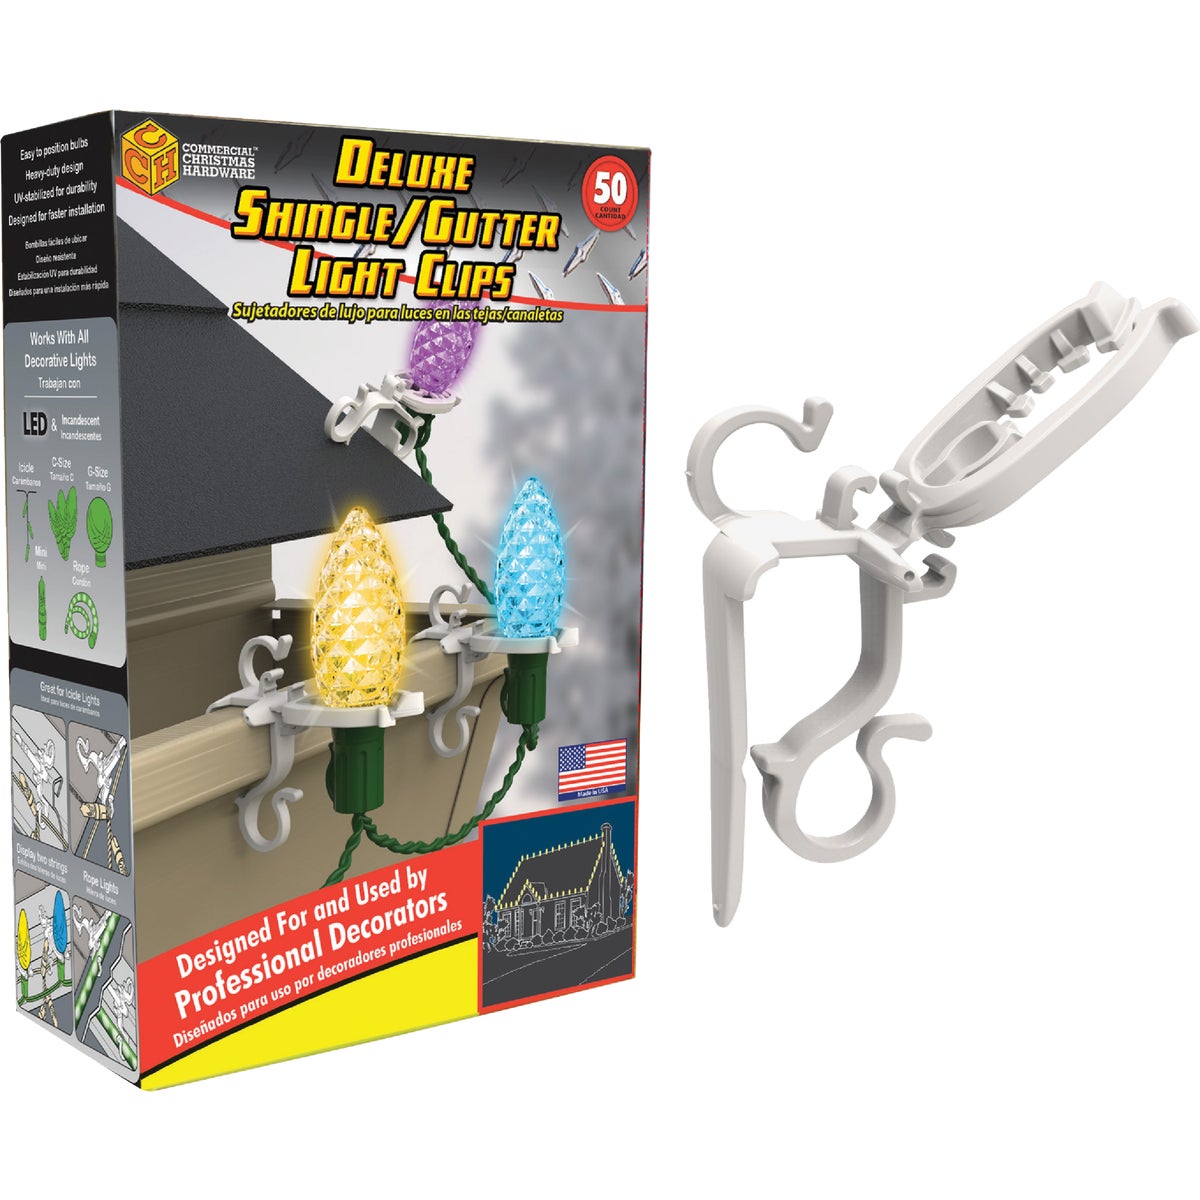 Item 900253, Deluxe clip-on light clips ideal for use on shingles and gutters.